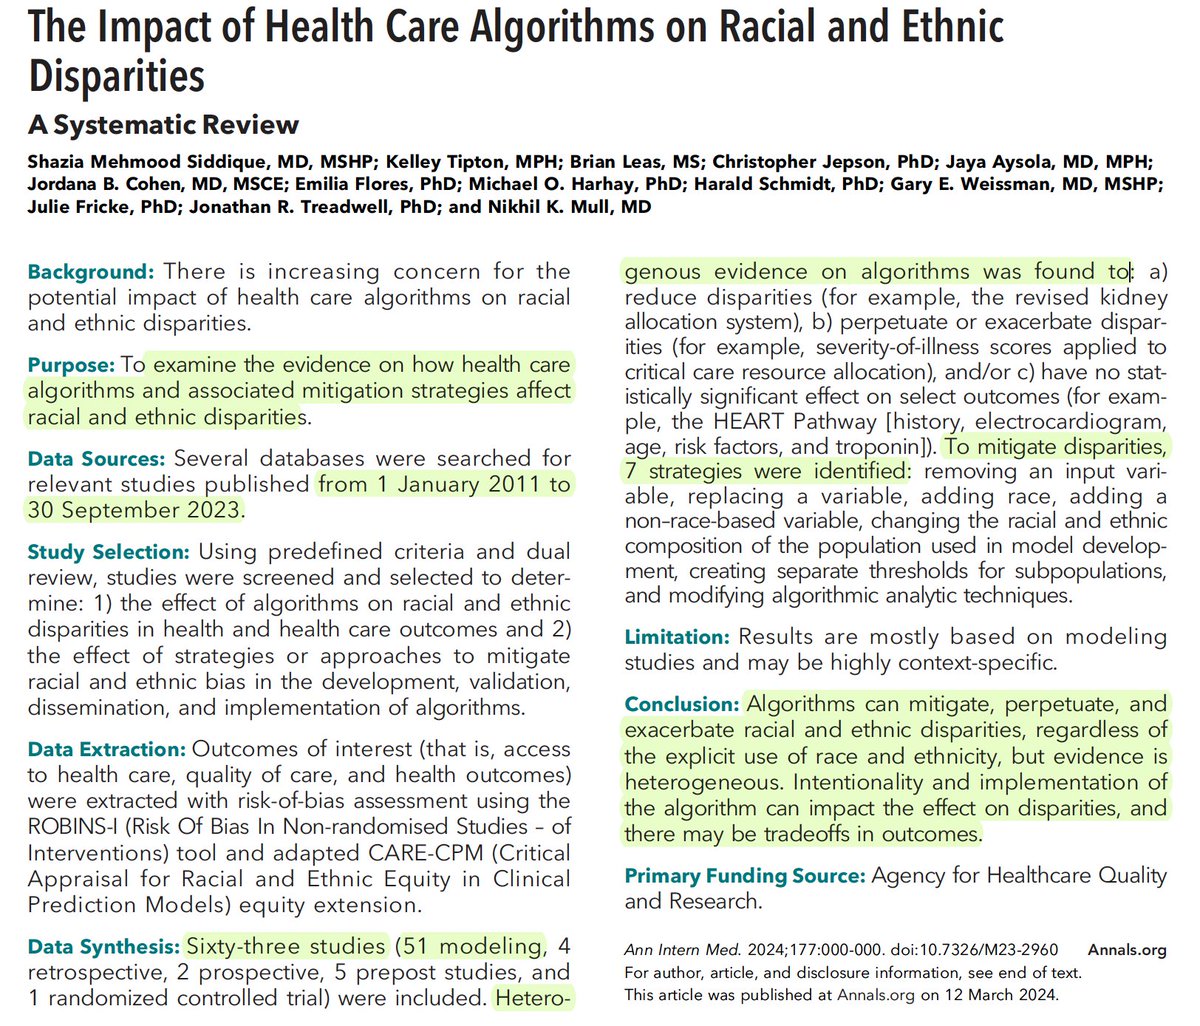 A systematic review of 65 health care algorithms (51 were simulations) over the past 12 years highlights their potential to with mitigate or exacerbate racial and ethnic disparities acpjournals.org/doi/10.7326/M2… @ShaziaMSiddique @AnnalsofIM #AI